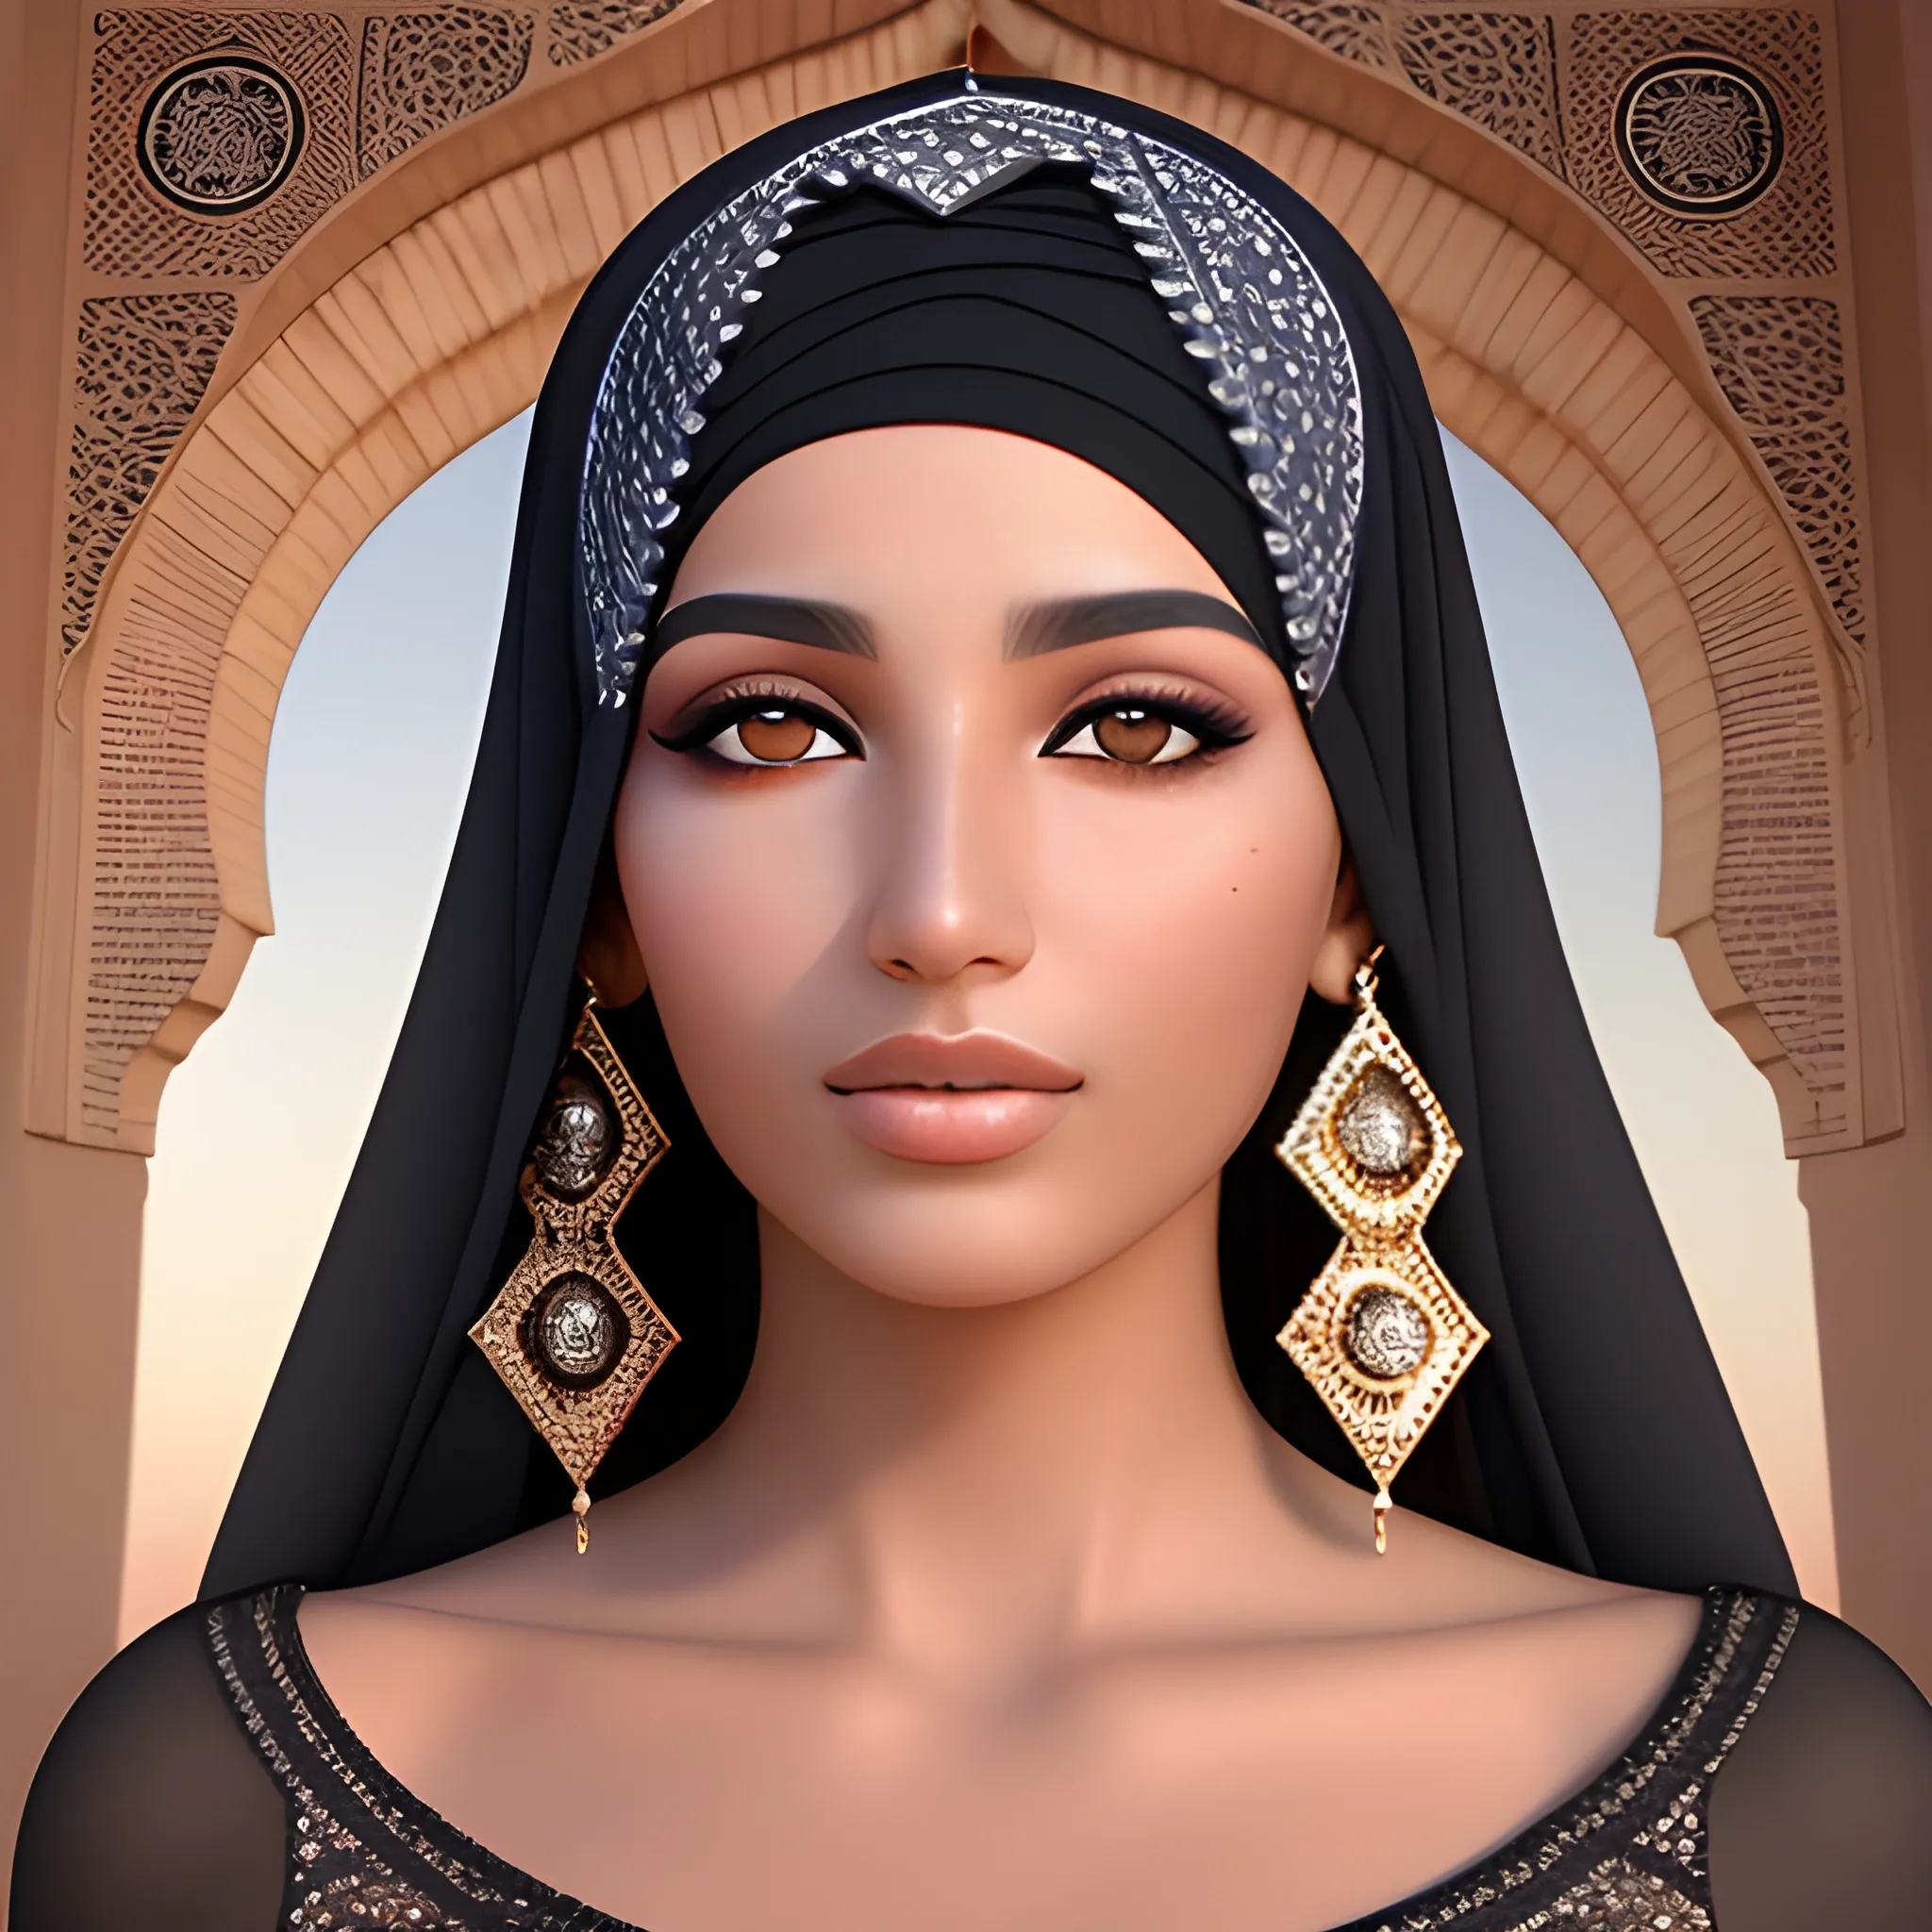 Moroccan beauty, extreme picture quality, ambient light, exquisite facial features, 3D